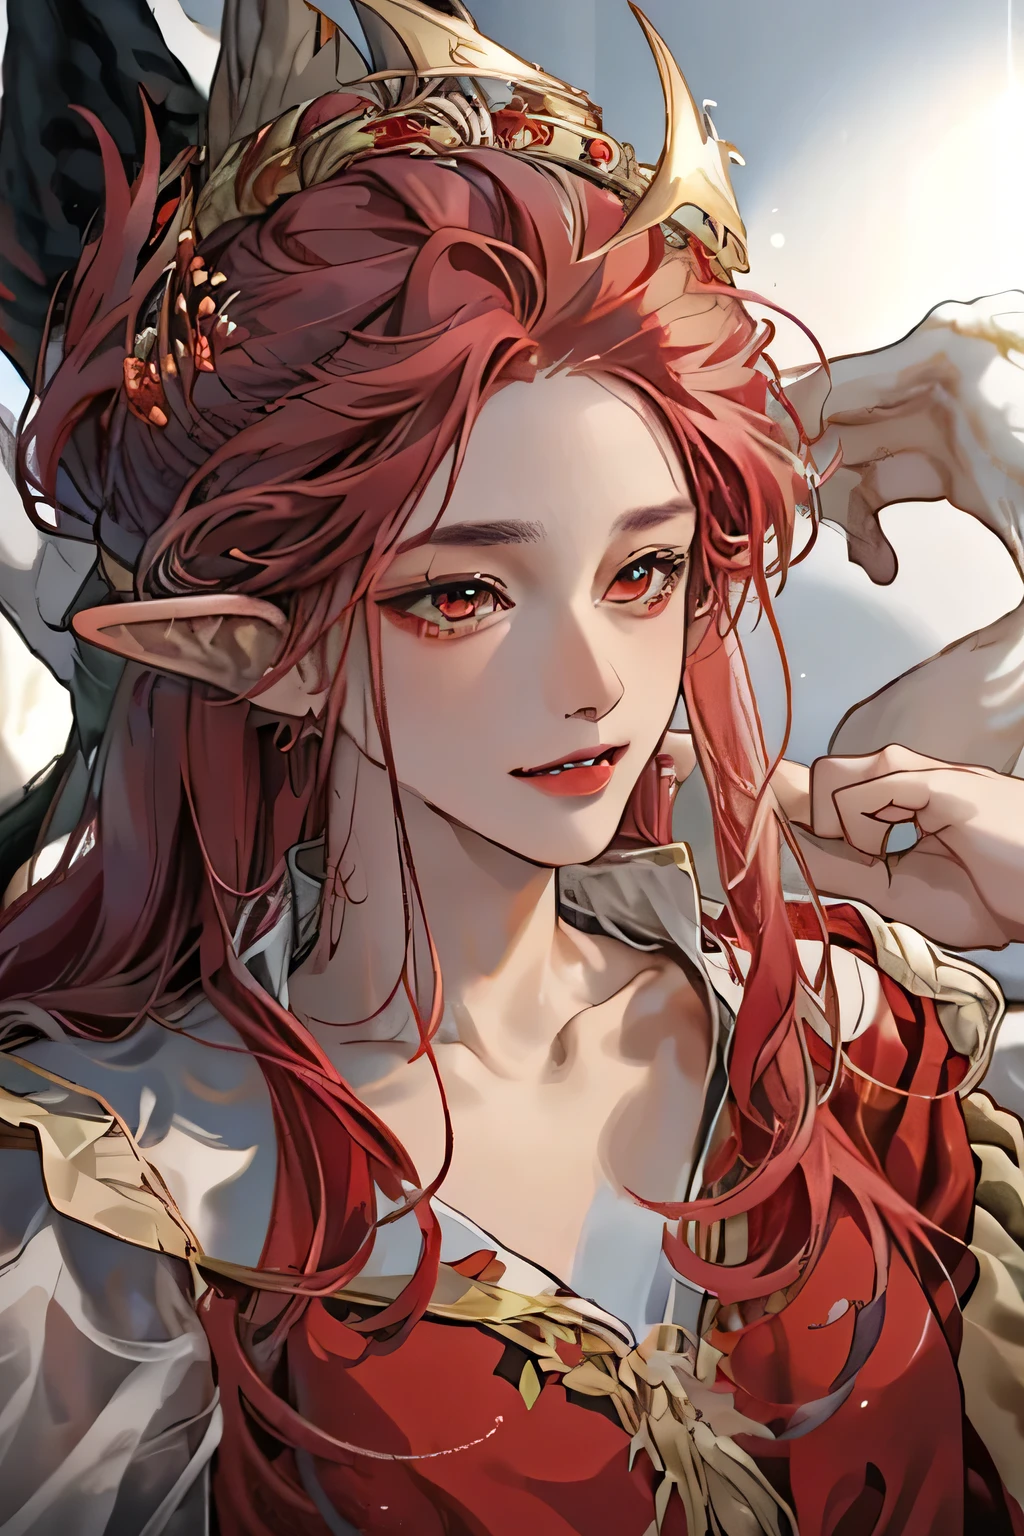 Single male，Handsome，portrait, Occult magic，red maroon hair，long hair curl, straight hair, tan skintone, red eyes, red colors,fantasy robes, flowy，The face is surprised，pointed ears, Clear eyes，fantasy，lush forest background, Rich in color，Bust photo，Close-up shot, nude lips, with fangs